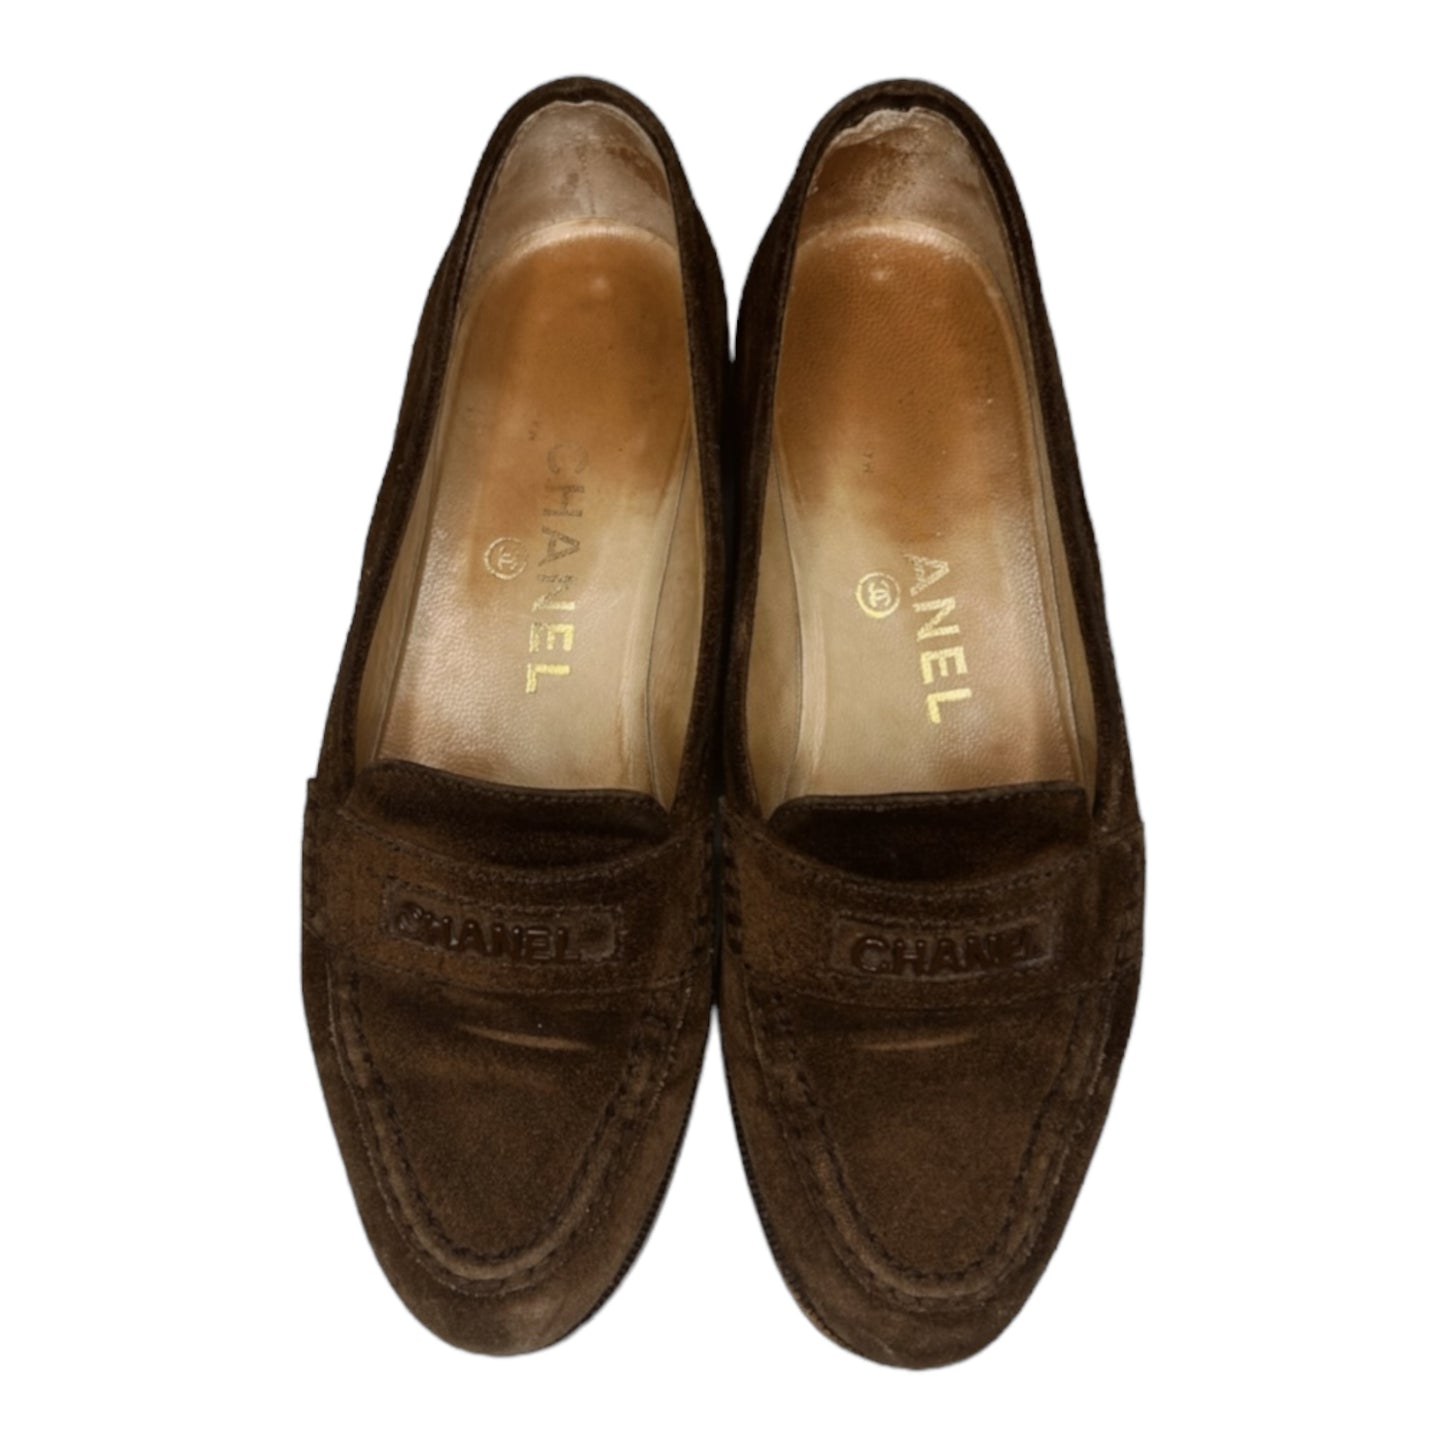 Vintage Chanel suede loafers